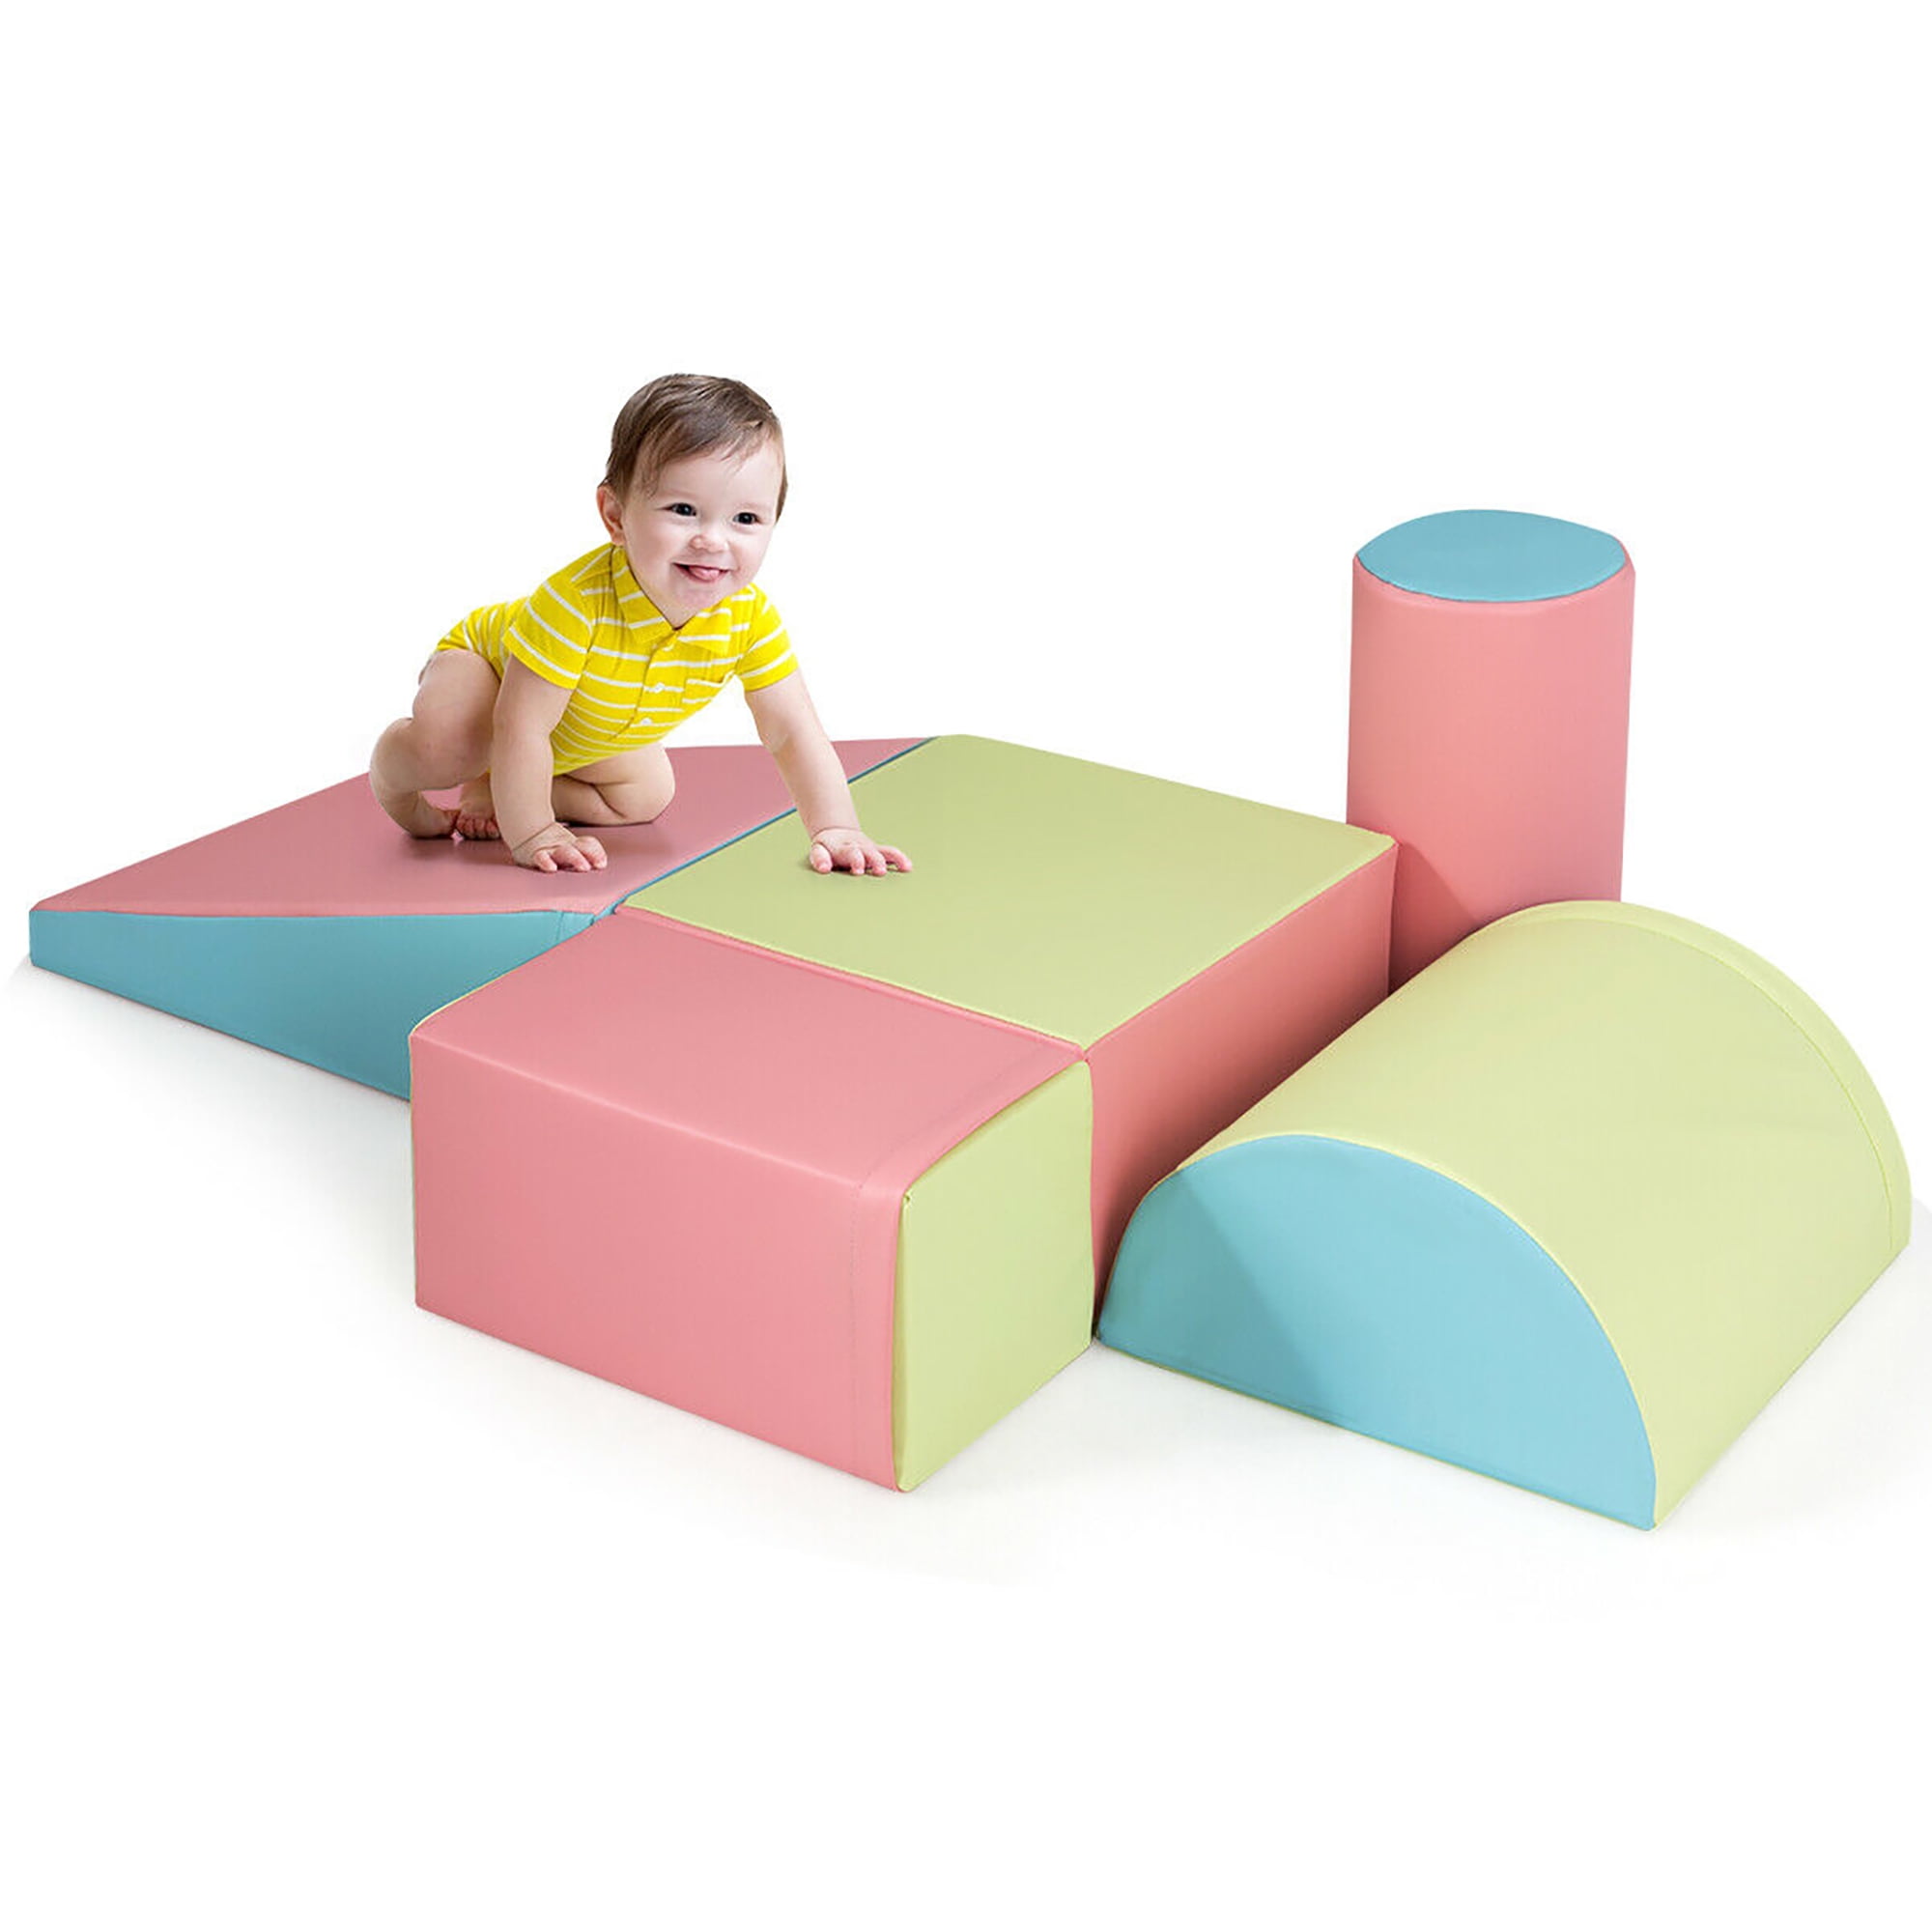 Go Light 6 Pieces Multipurpose Soft Foam Blocks Playset with Foldable Seat for Home,Foam Climbing Blocks for Toddlers Soft Play Equipment,Daycare,Preschool,Lightweight Colorful Fun Foam Set of 4 